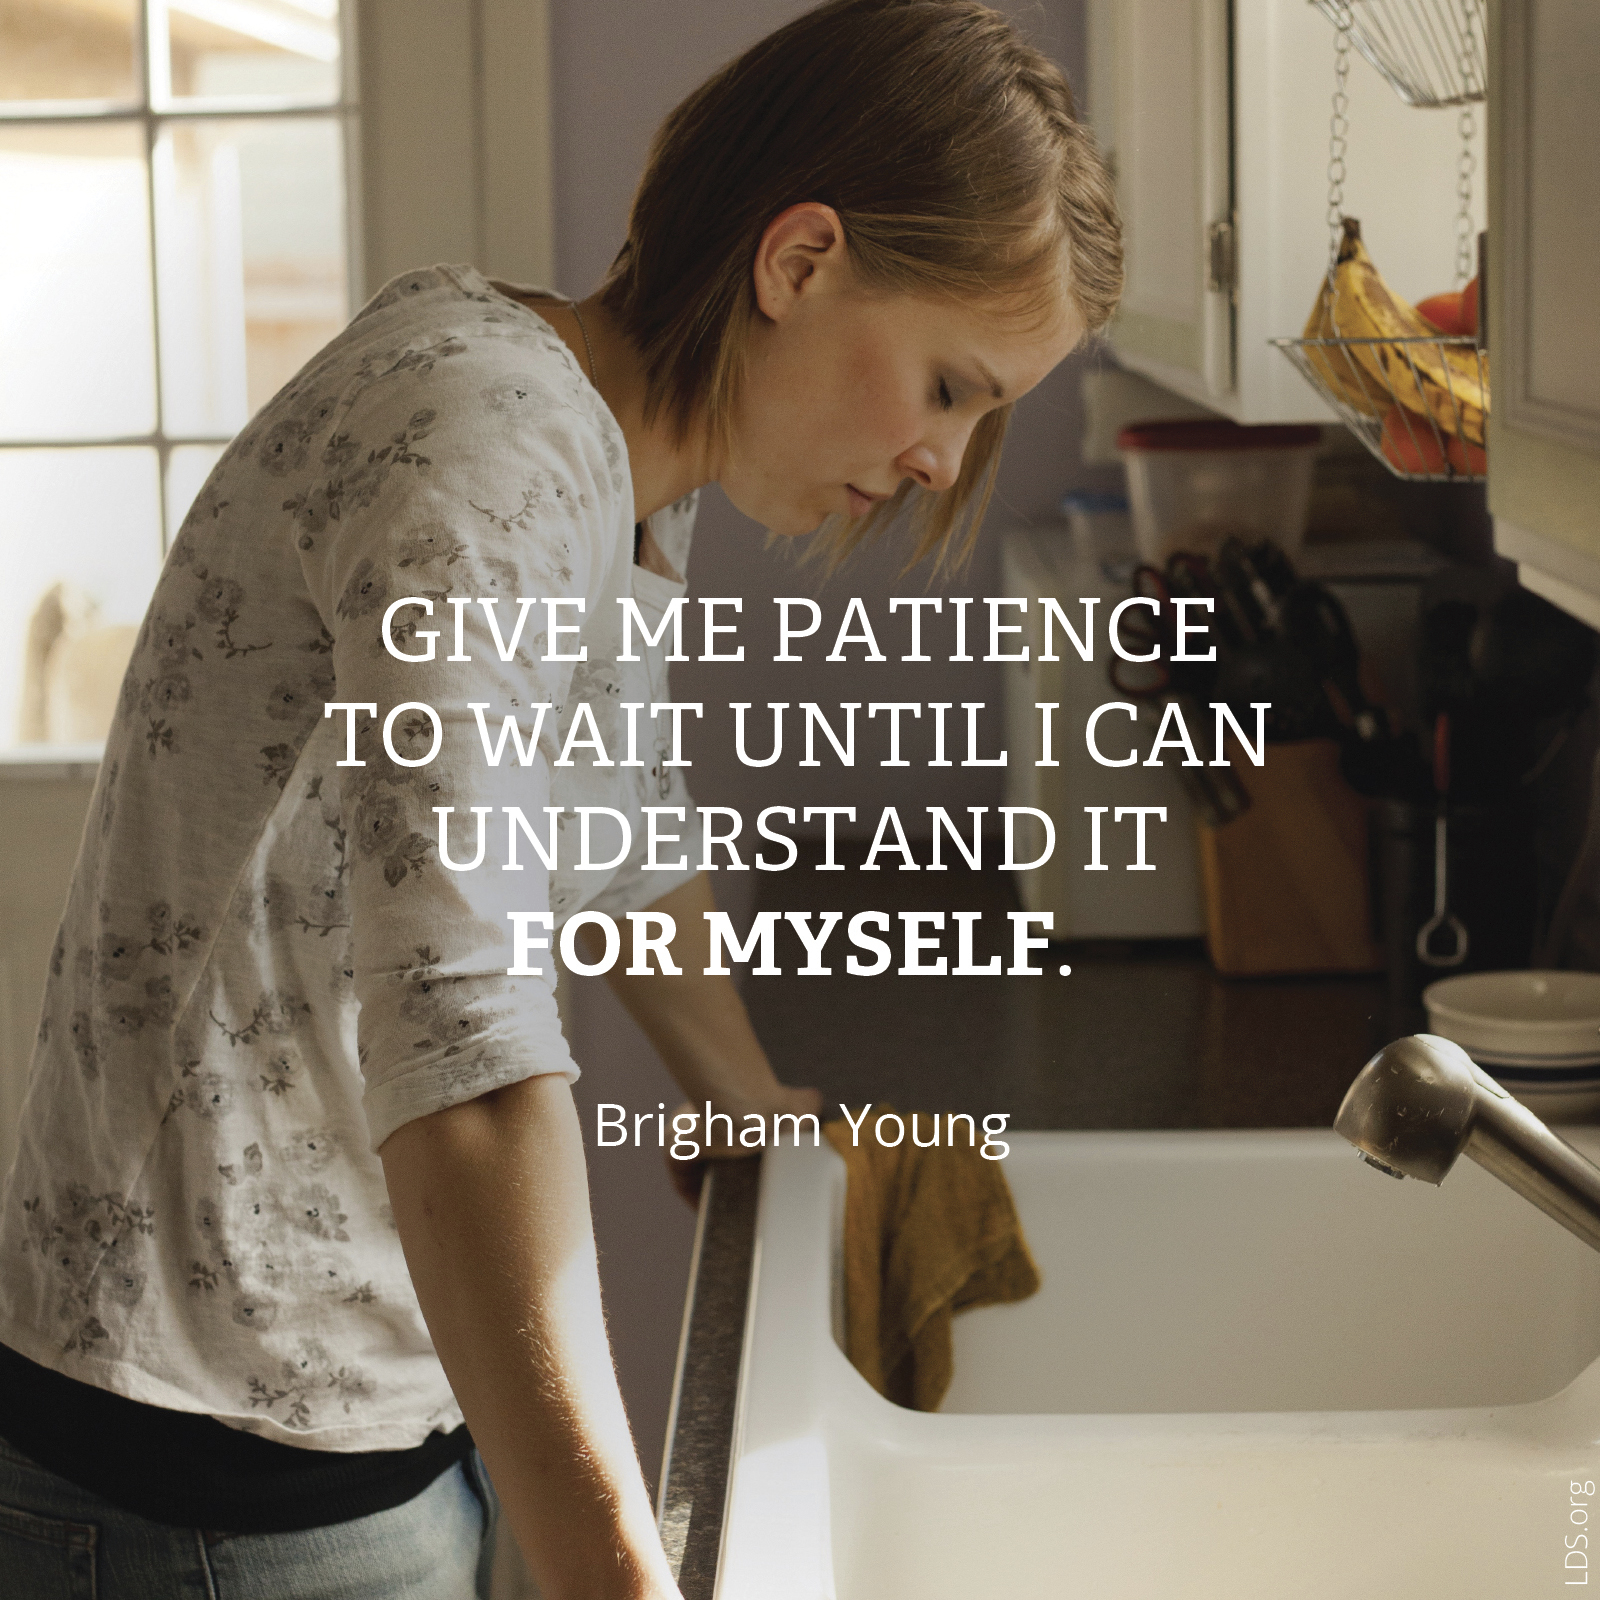 “Give me patience to wait until I can understand it for myself.”—Brigham Young, Teachings of Presidents of the Church: Brigham Young (1997), 75